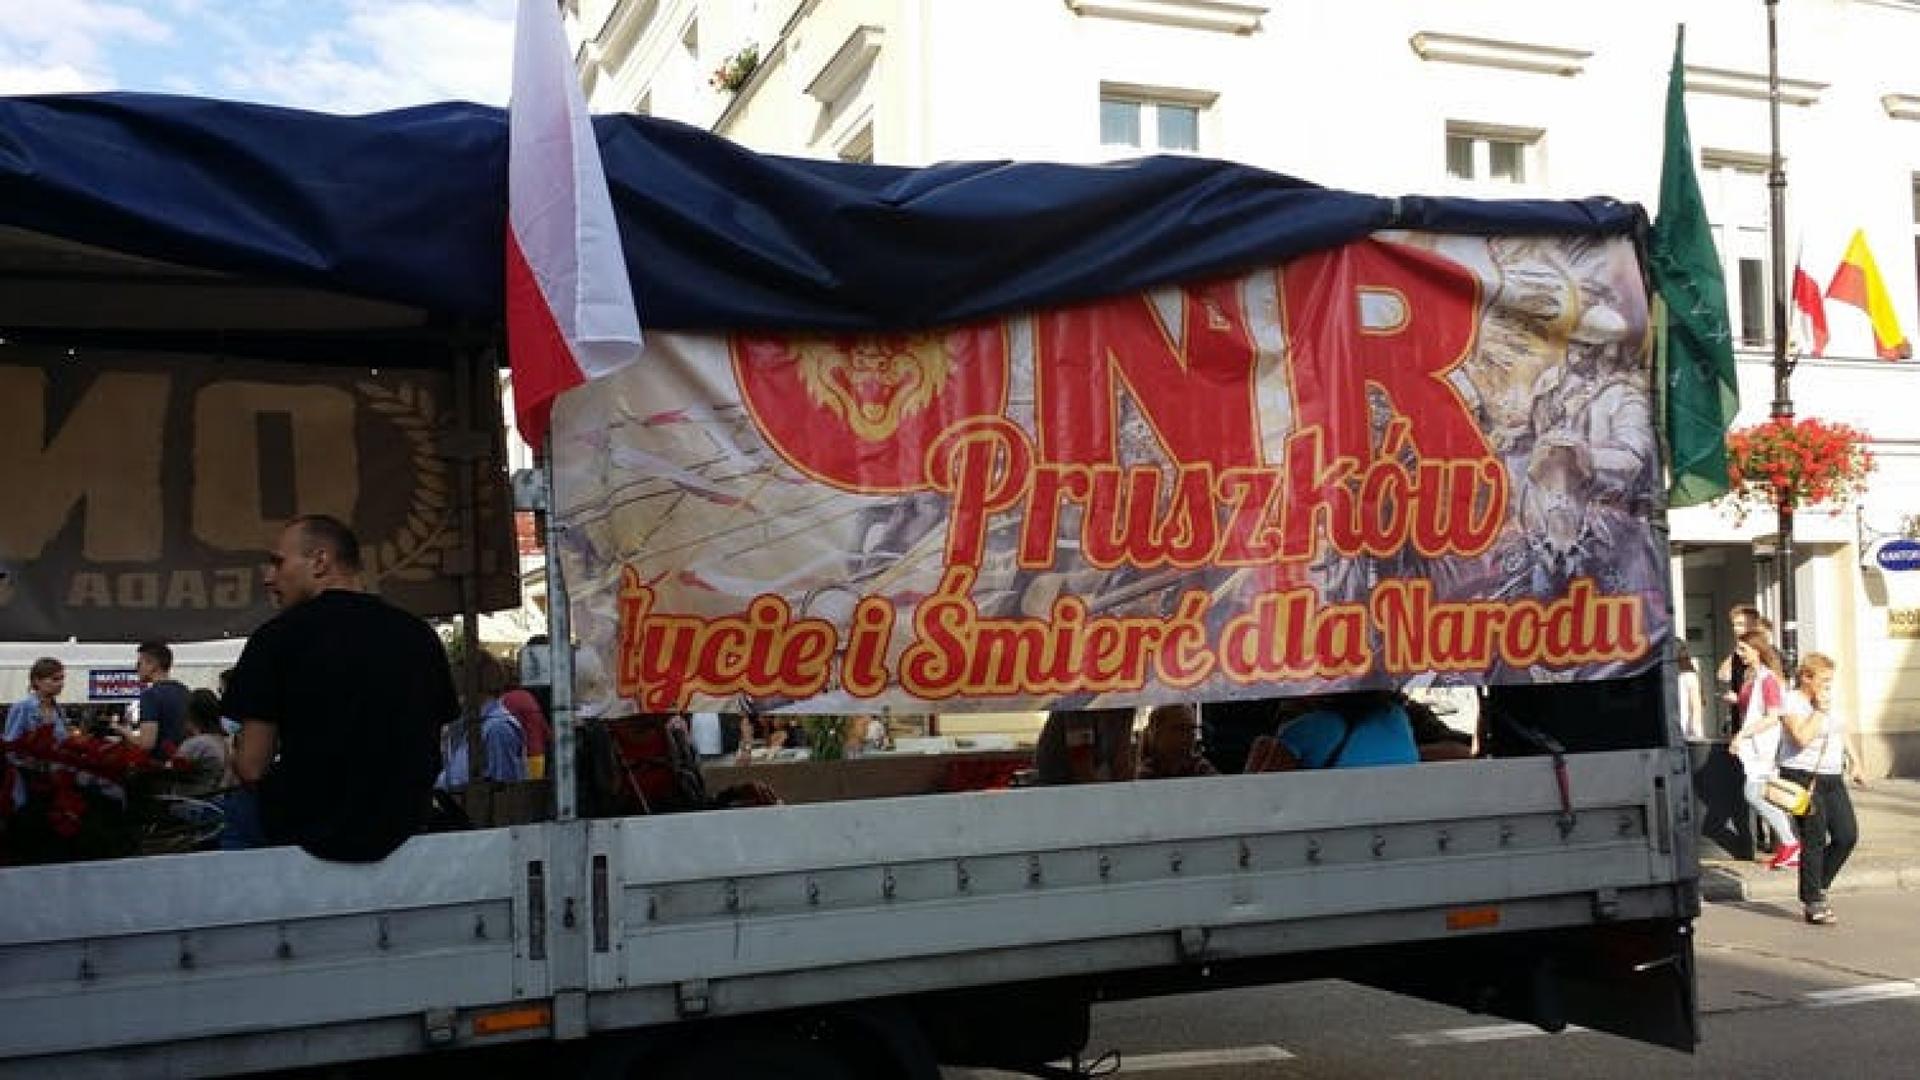 A truck with a sign on it written in Polish